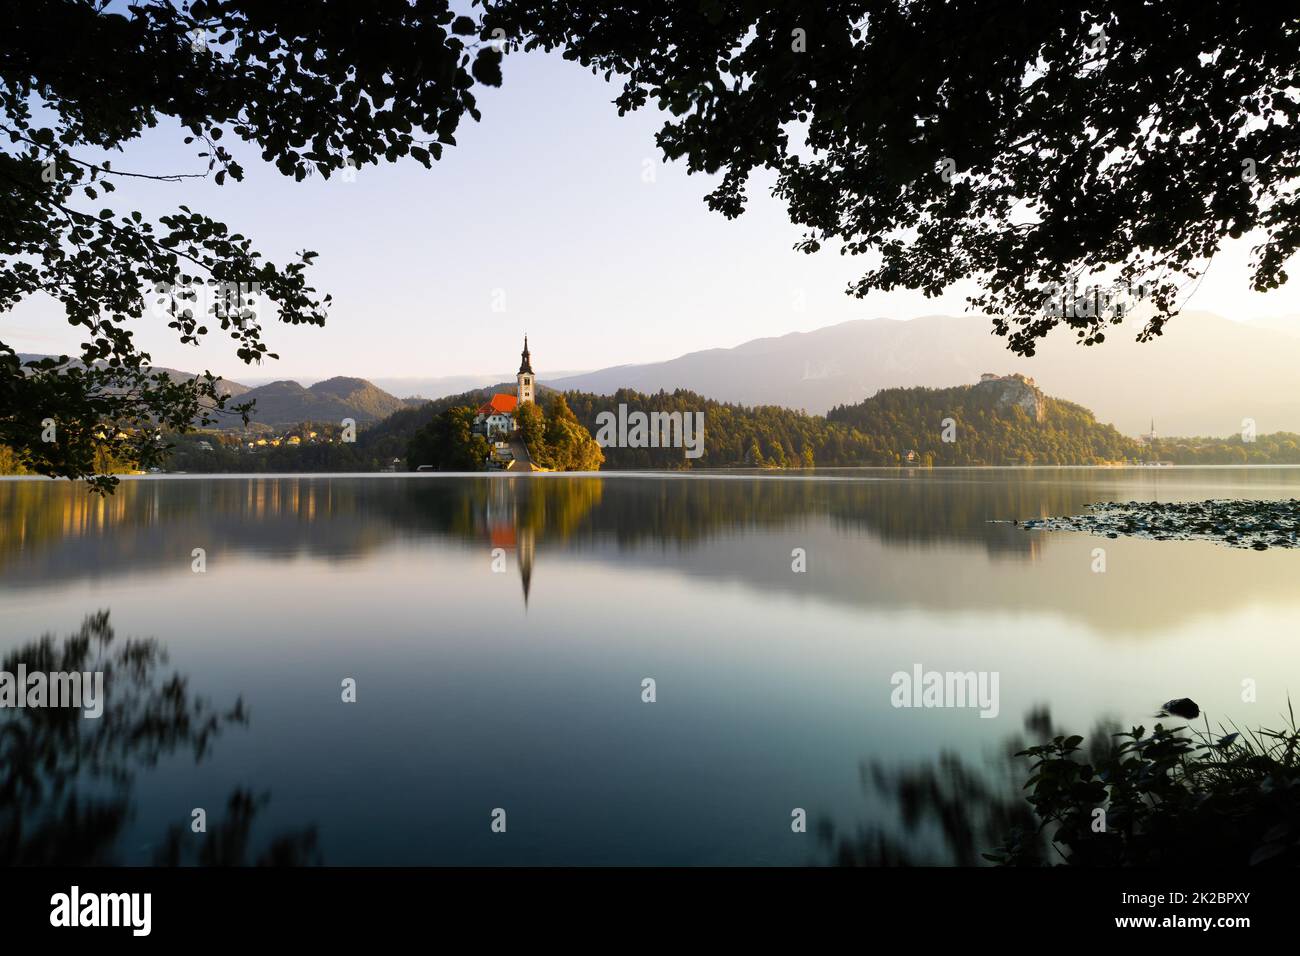 Lake Bled with a church on an island at sunrise through window of branches Stock Photo